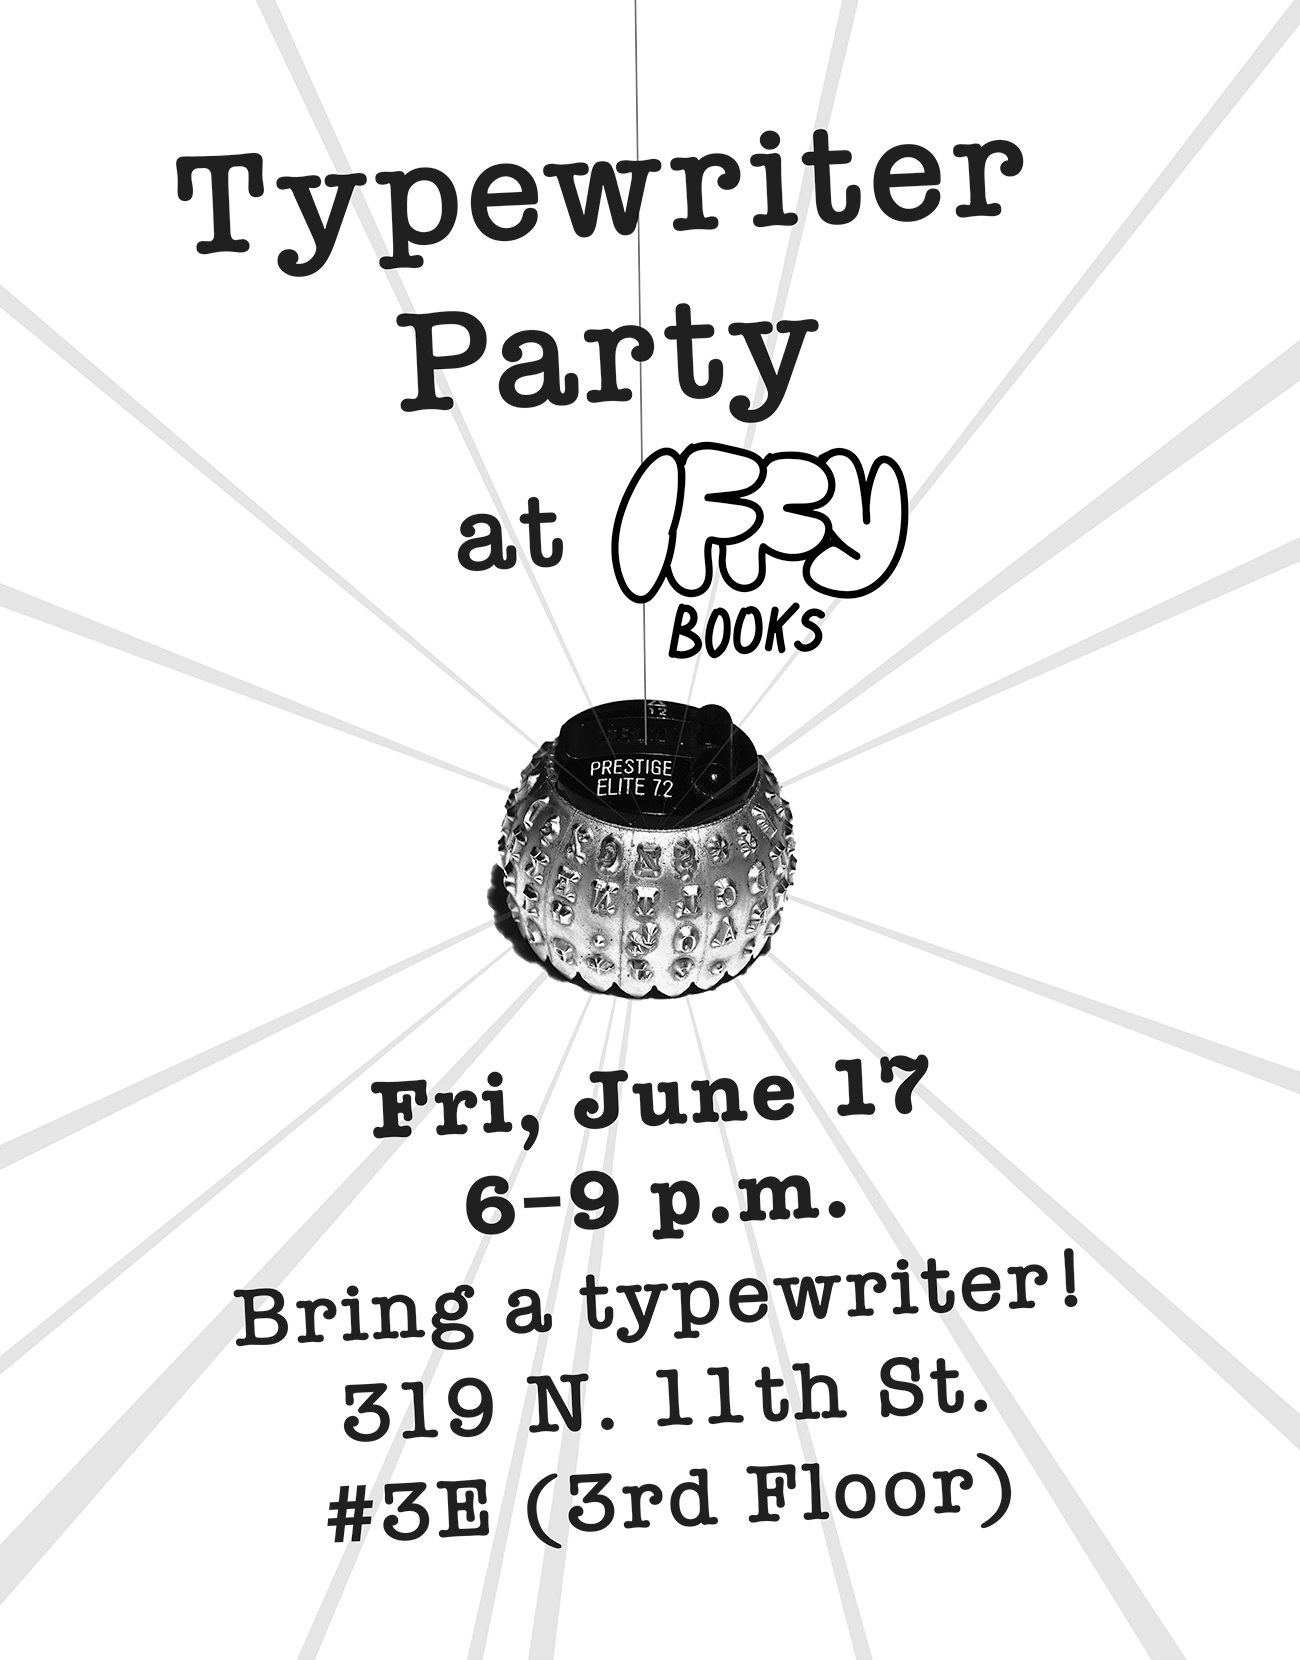 Flyer with an image of a typewriter ball styled like a disco ball, with rays of light shining in every direction. The text says "Typewriter Party at Iffy Books / Fri, June 17 / 6–9 p.m. / Bring a typewriter! / 319 N. 11th St. #3E (3rd Floor)"